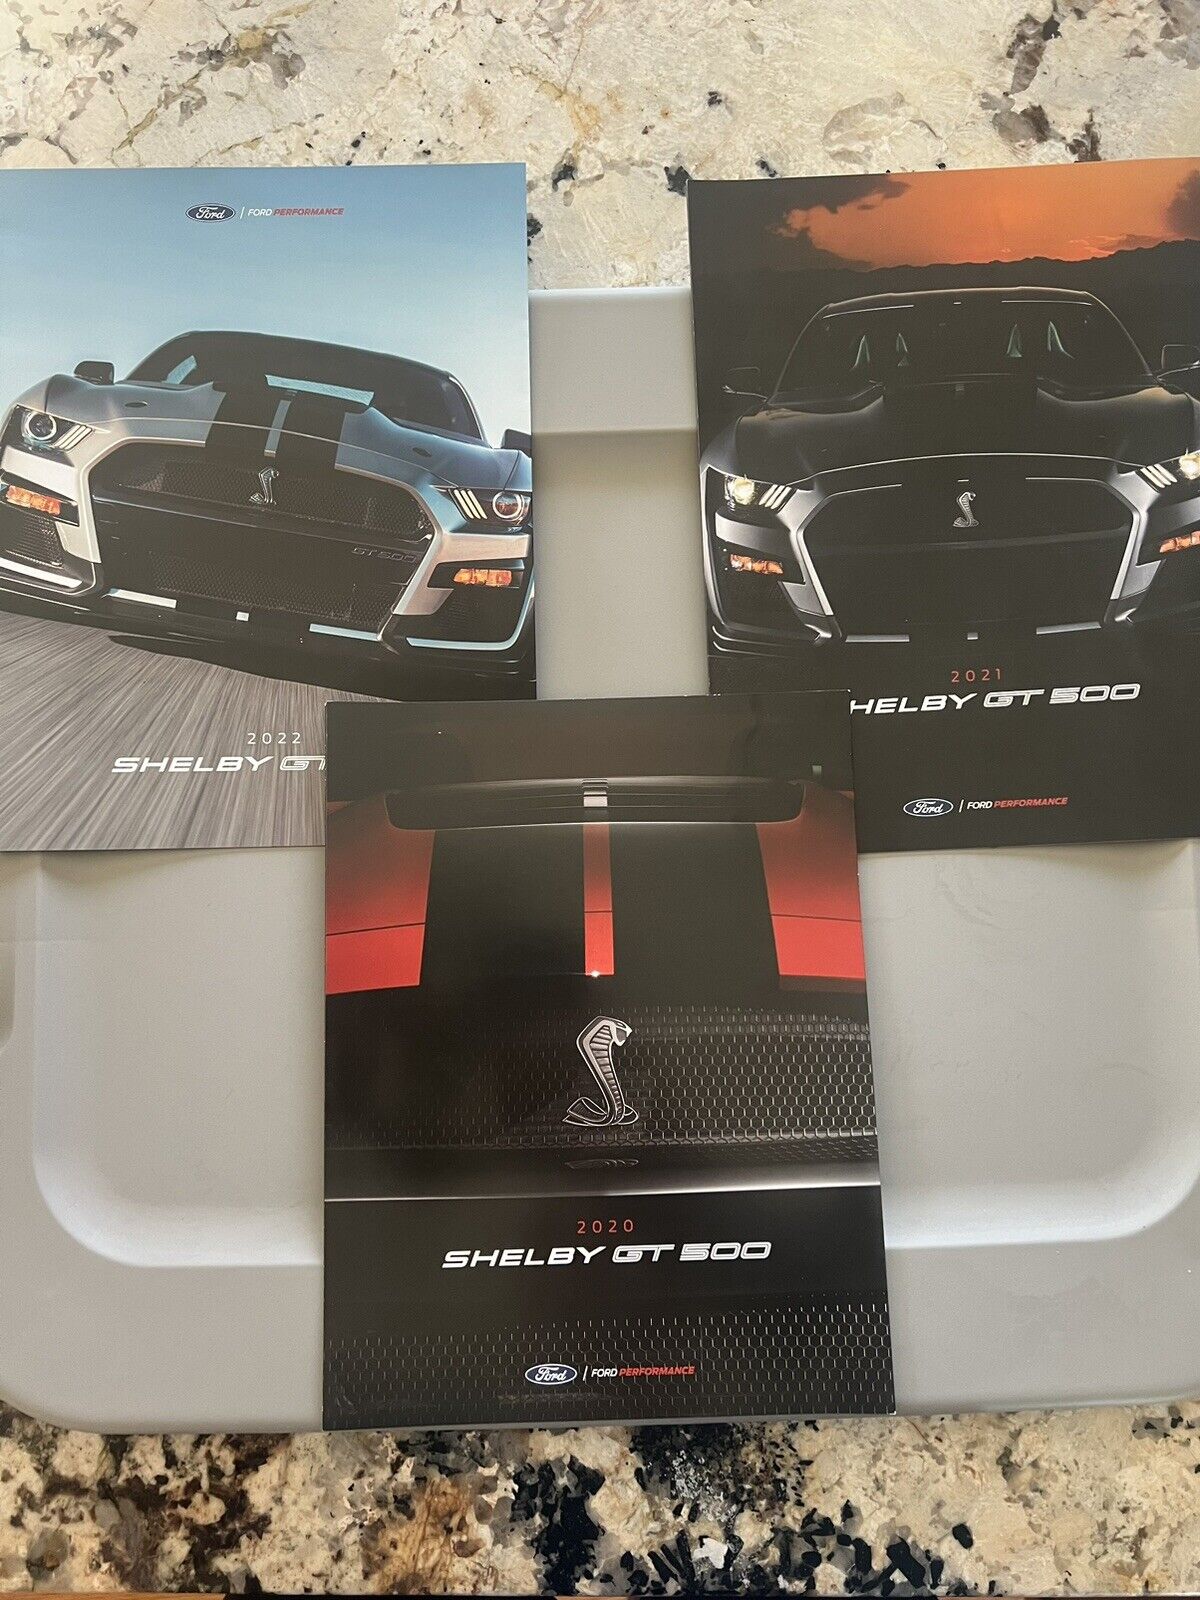 SHELBY GT500 GT 500 FORD MUSTANG—US DEALER SALES BROCHURE Lot Of 3 Different